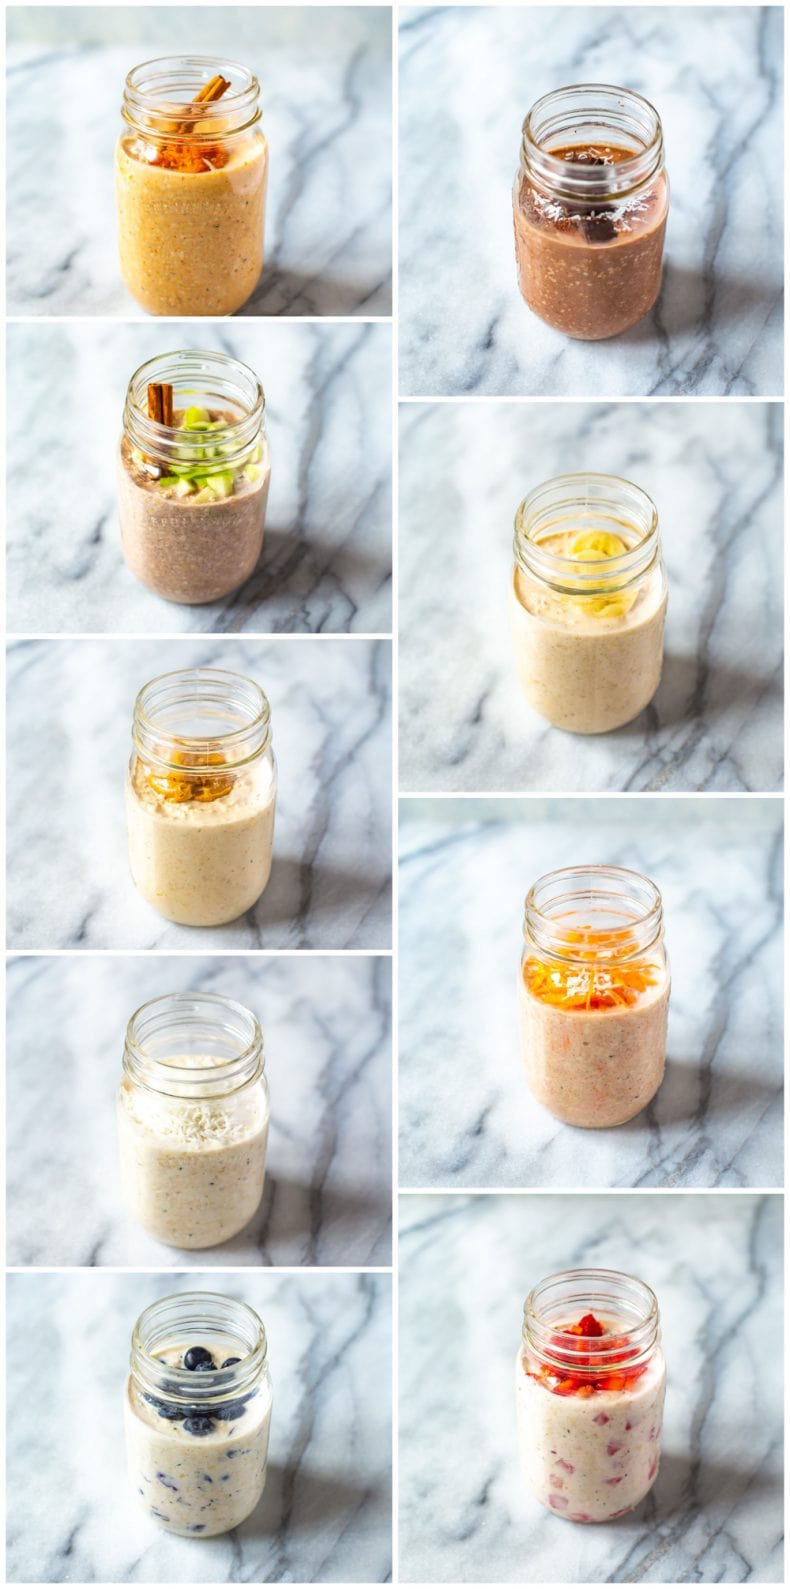 Overnight Oats 9 Ways - Easiest Recipes and Tips!